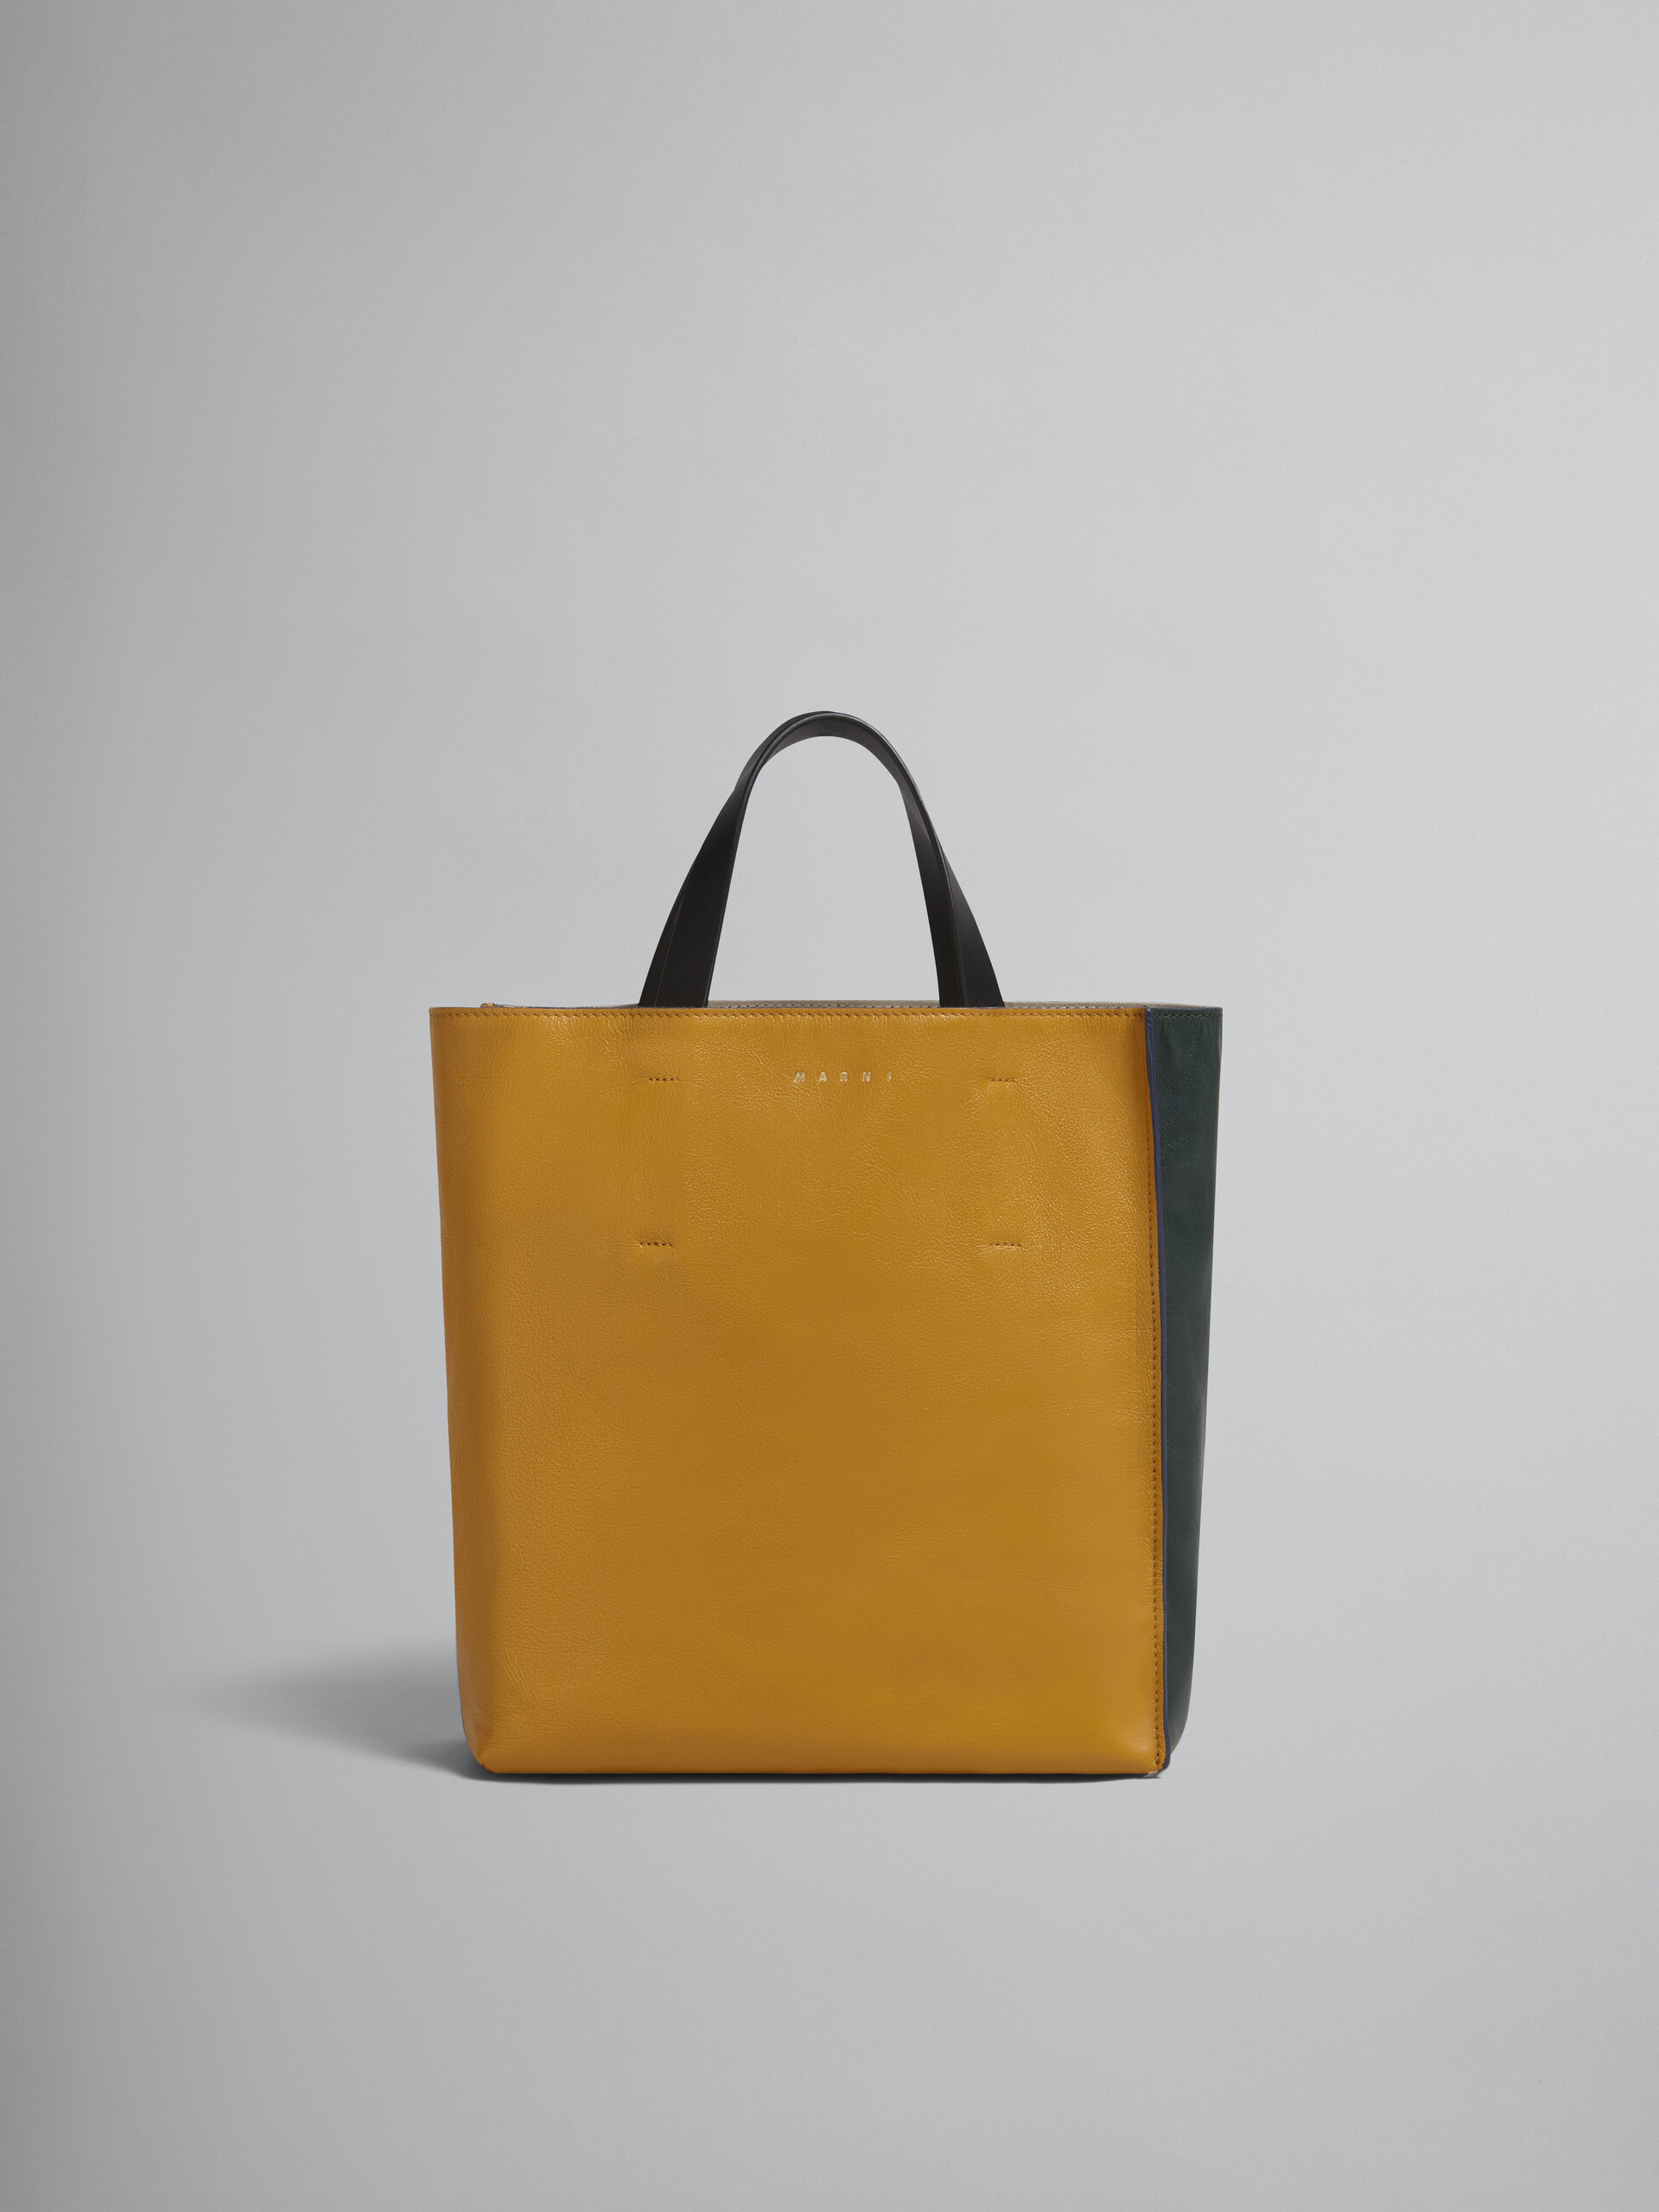 MUSEO SOFT small bag in yellow and green leather - Shopping Bags - Image 1